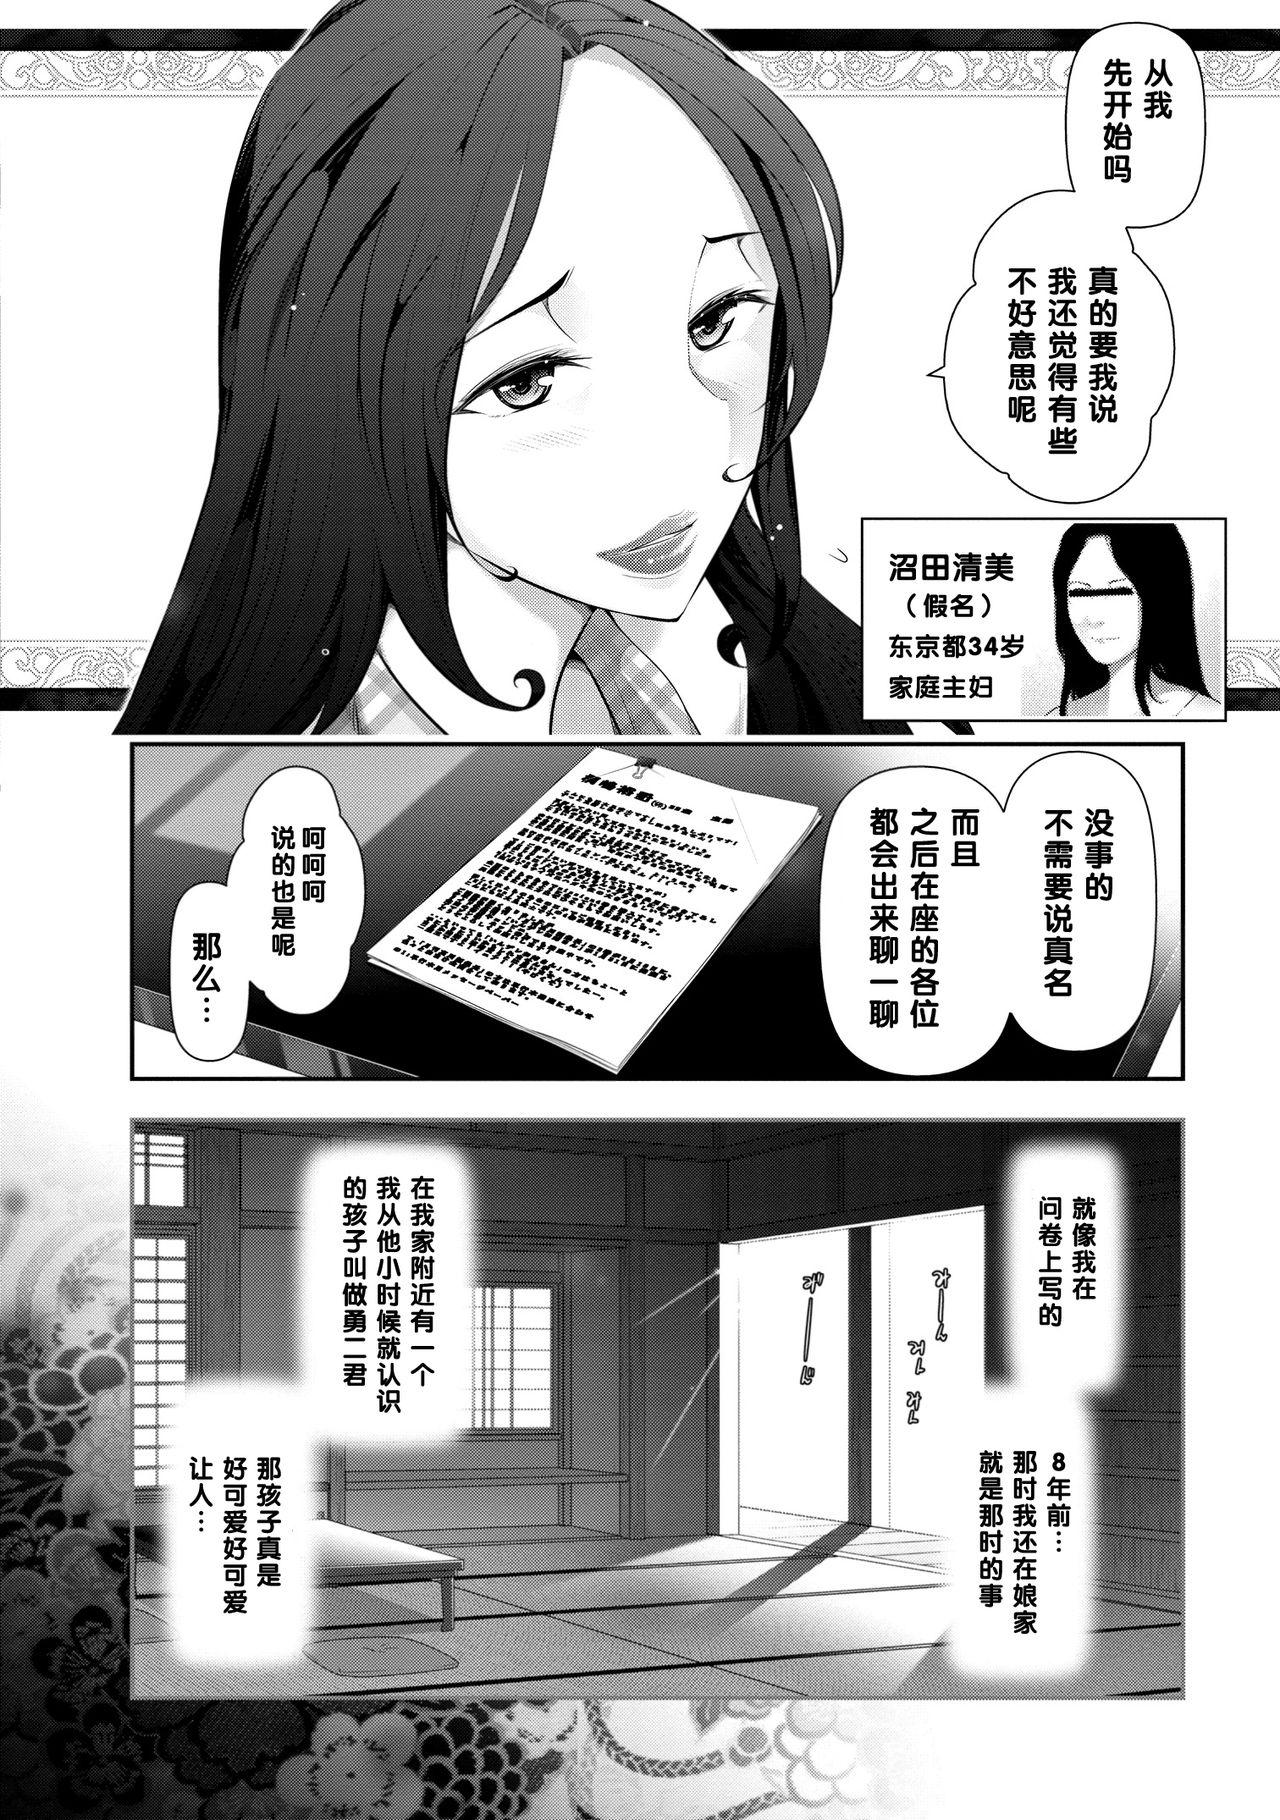 Class Room 沼田清美さん（34歳）の場合（Chinese） Holes - Page 6